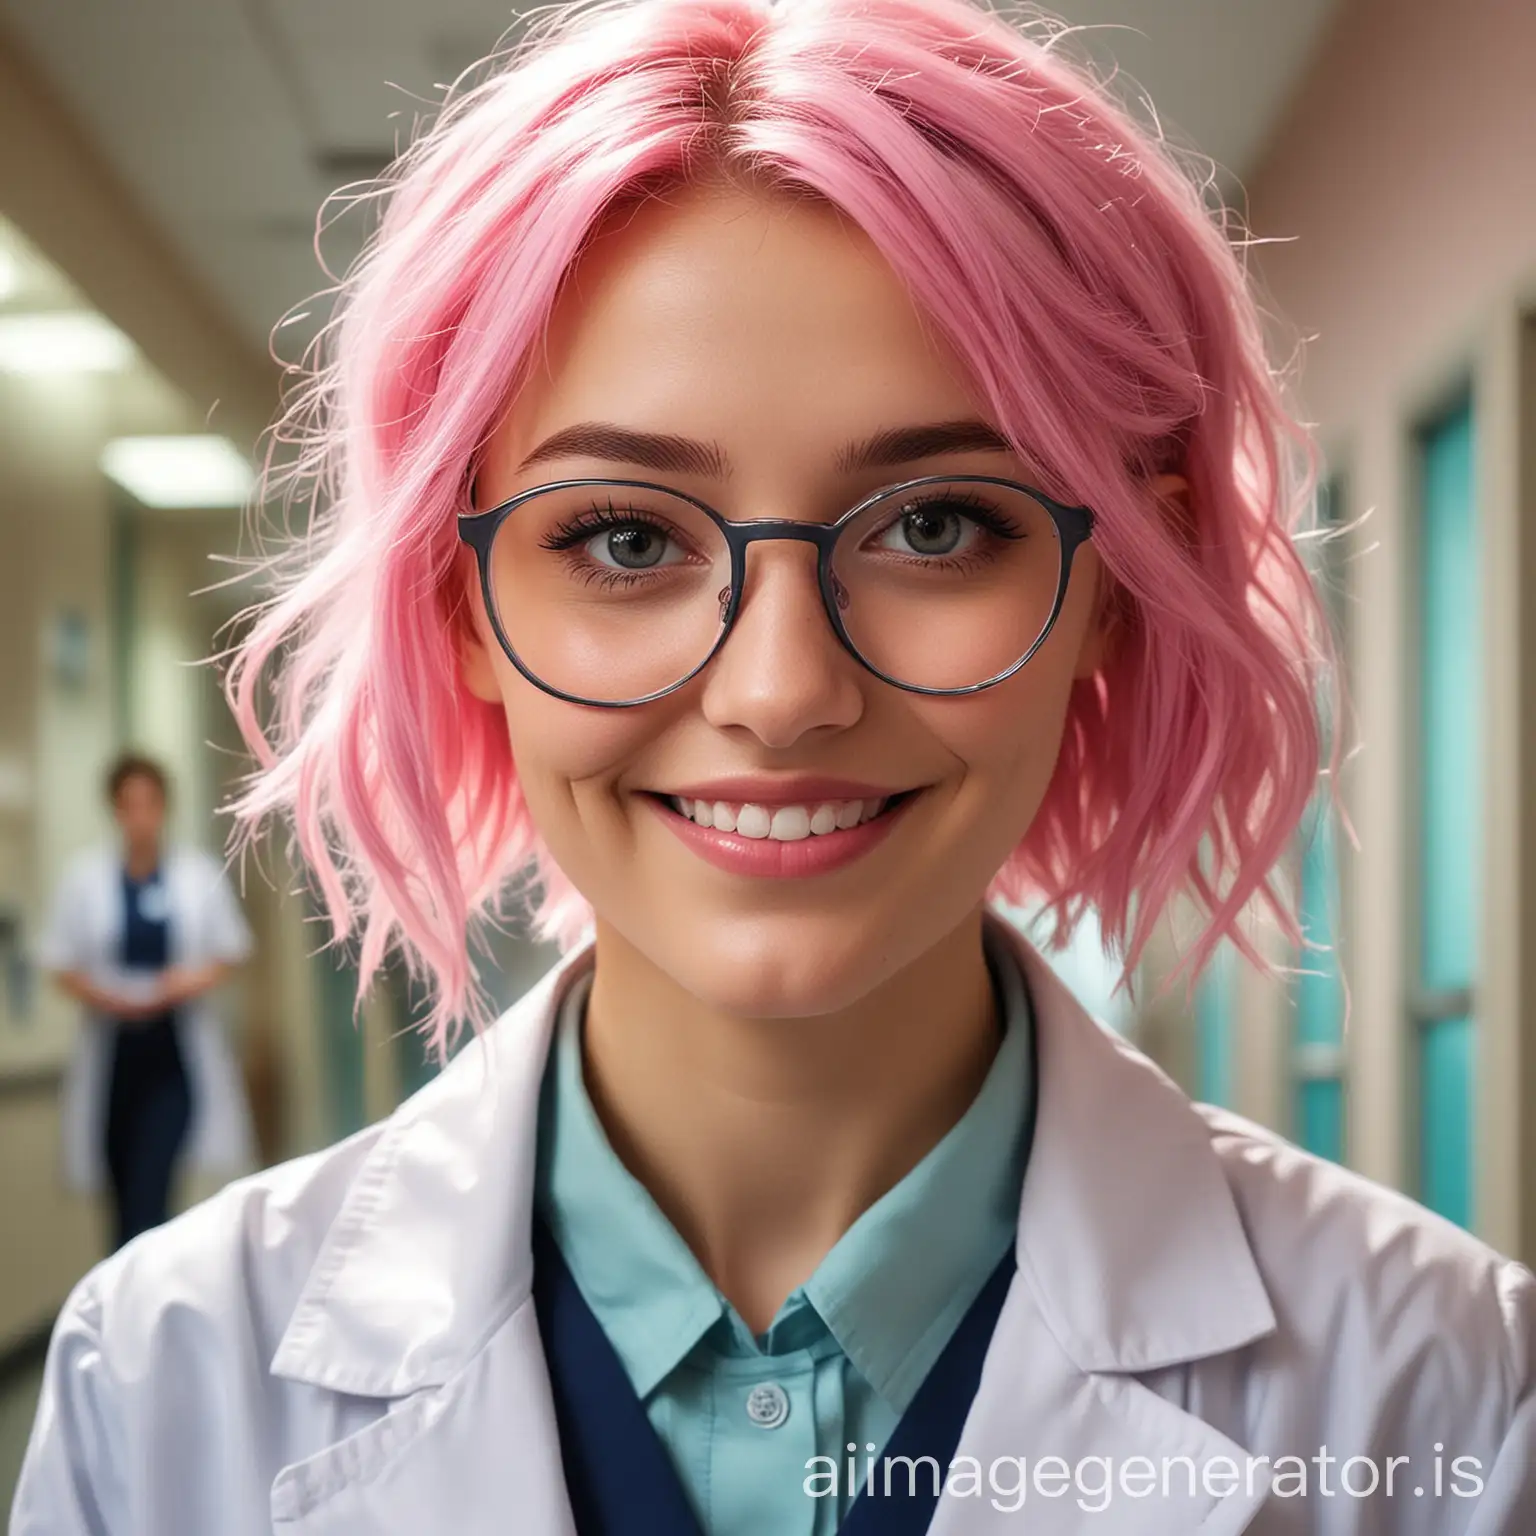 A breathtakingly beautiful young doctor, her delicate features framed by a pair of stylish glasses. She exudes an air of intelligence and warmth, her pink hair adding a playful touch to her professional appearance. Her smile is infectious, revealing a set of perfectly aligned teeth, and her gaze is fixed on something just beyond the viewer's periphery, conveying a sense of focus and dedication. She's dressed in a crisp white coat, which accentuates her slender figure, and her name tag identifies her as "Dr. Rosie." The background of the image shows a busy hospital corridor, with nurses and patients going about their daily routines, further emphasizing her role as a caring and competent medical professional., cartoon-style art, superb linework, nice colors and composition, bold linework, close-up, (masterpiece), cute art by Dana Terrace, by Rebecca Sugar, by ry-spirit, amazing and wholesome cartoon-style art, cute art style, (trending on artstation)